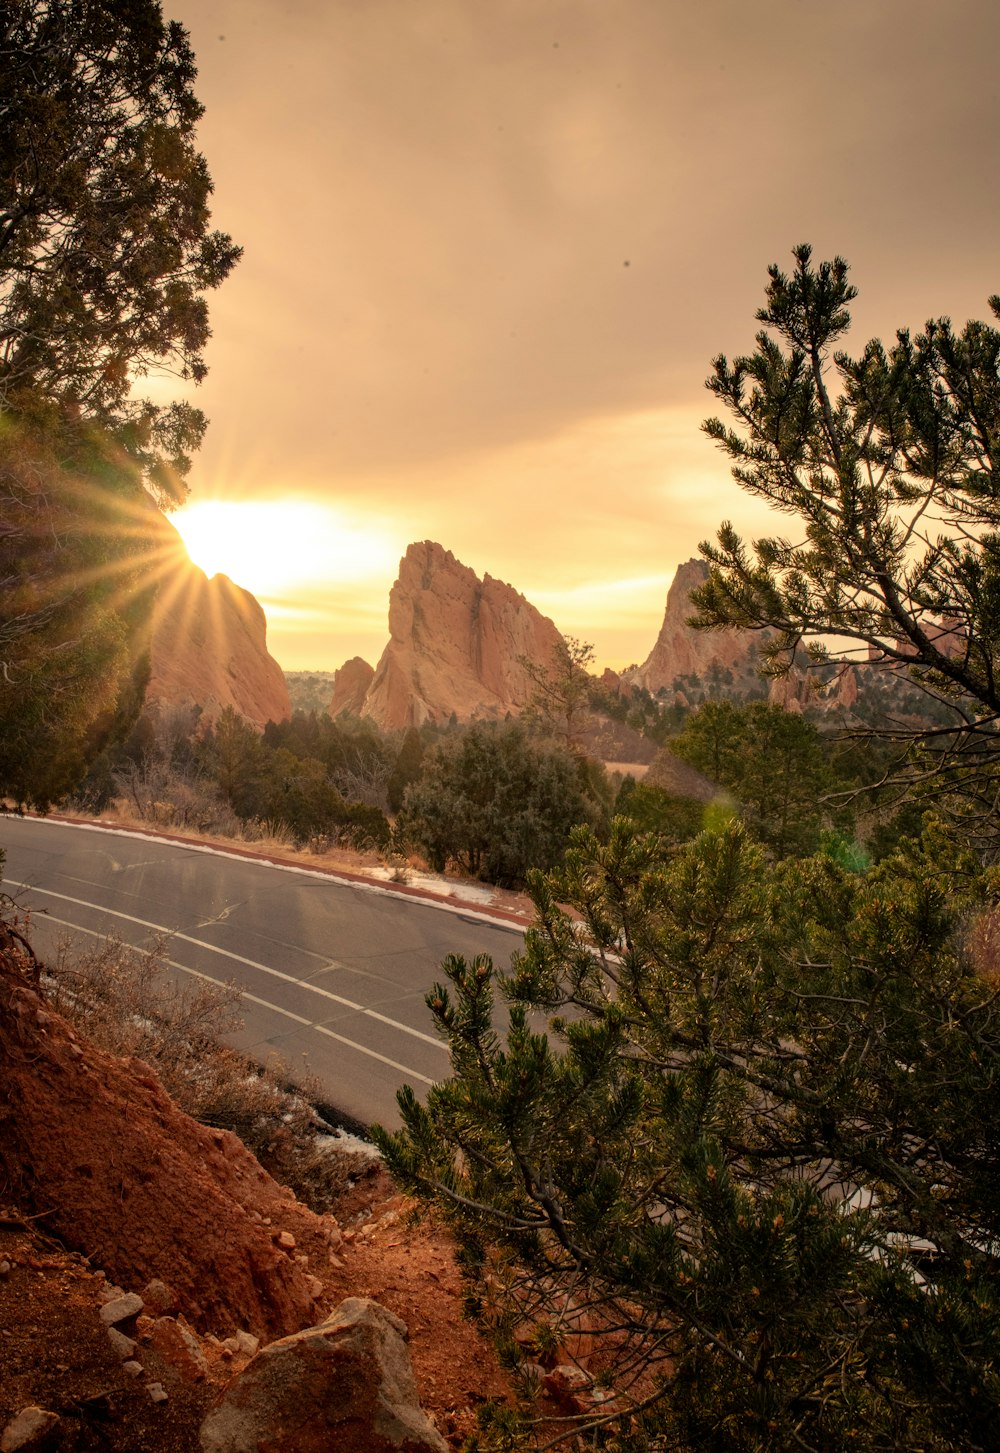 the sun is setting over a mountain road